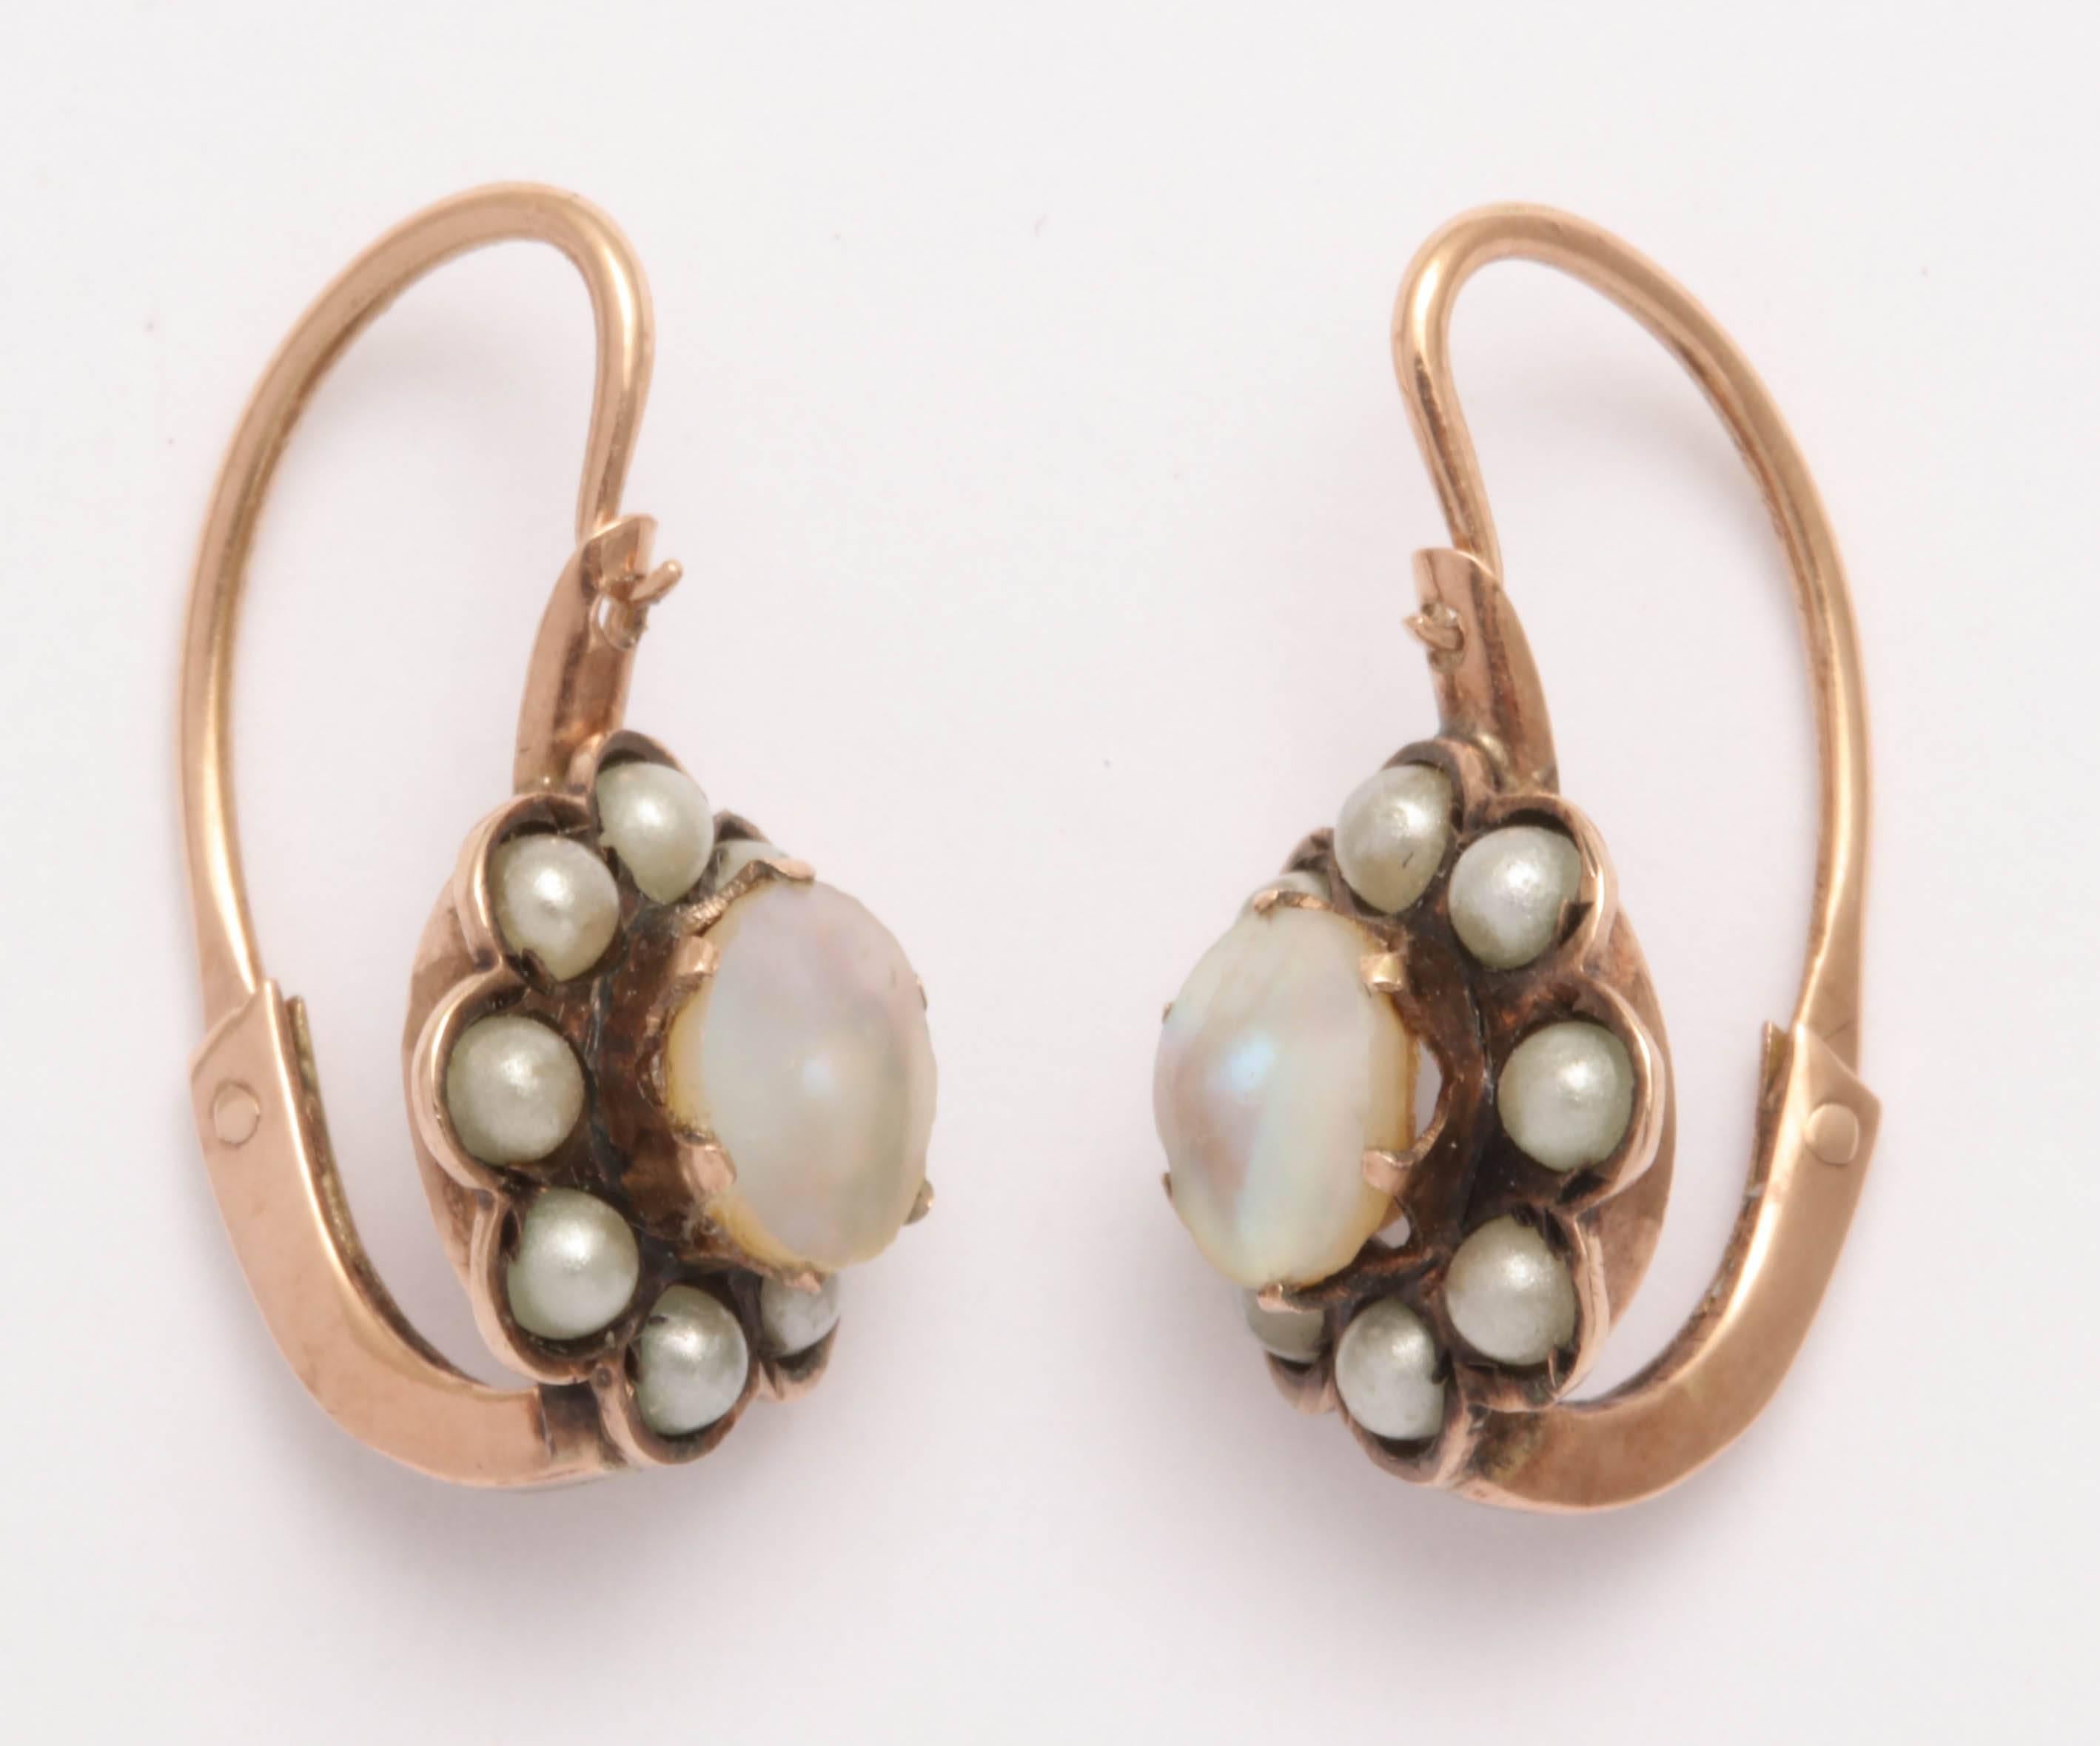 14kt rose gold Victorian earrings with mother of pearl center surrounded by eight seed pearls. Back to front closures. 